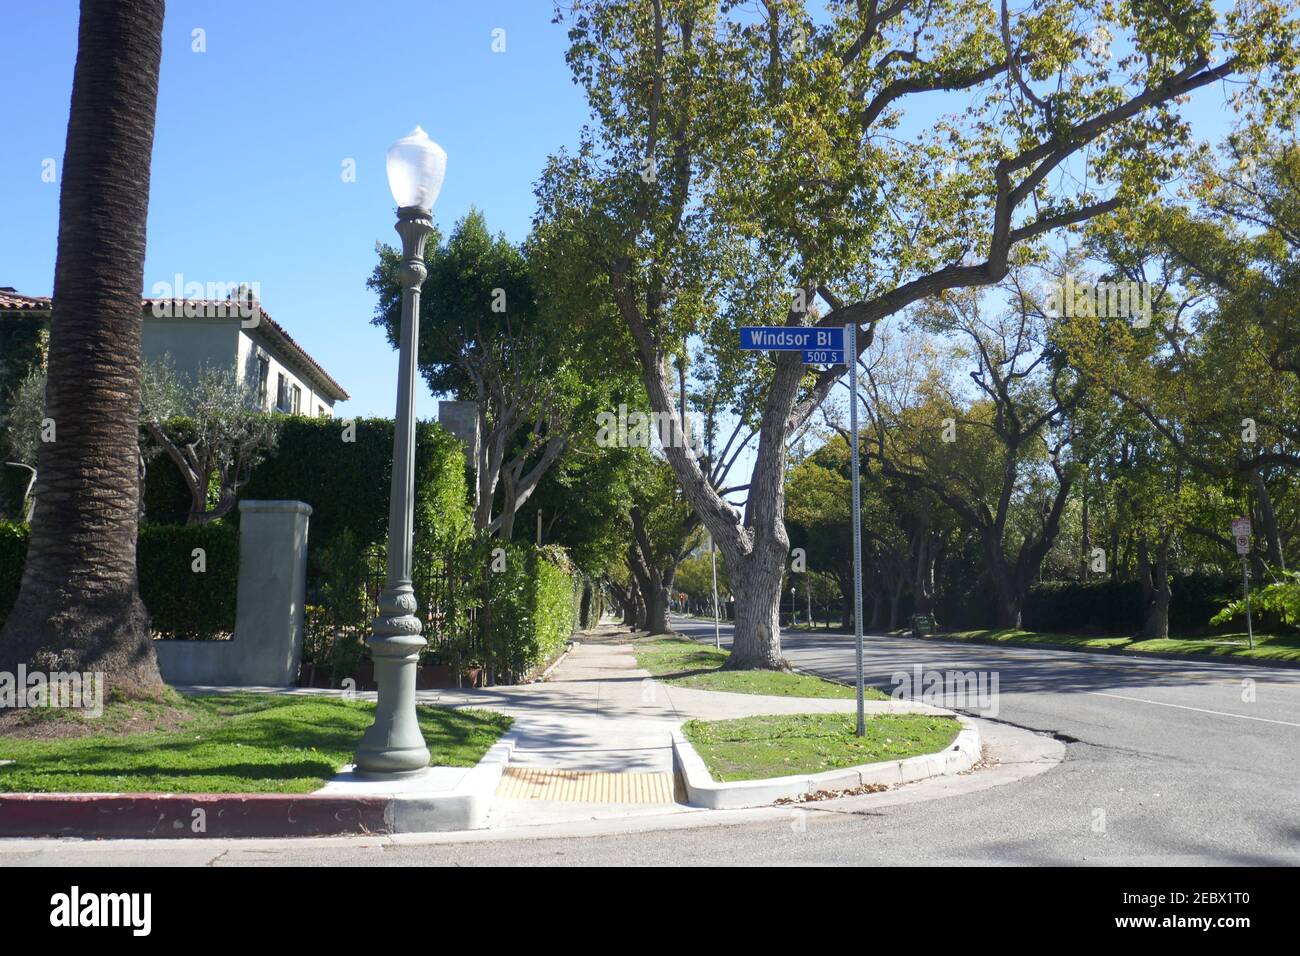 Los Angeles, California, USA 12th February 2021 A general view of atmosphere of singer Donna Summer's former home/house at 531 W. Windsor Blvd on February 12, 2021 in Los Angeles, California, USA. Photo by Barry King/Alamy Stock Photo Stock Photo